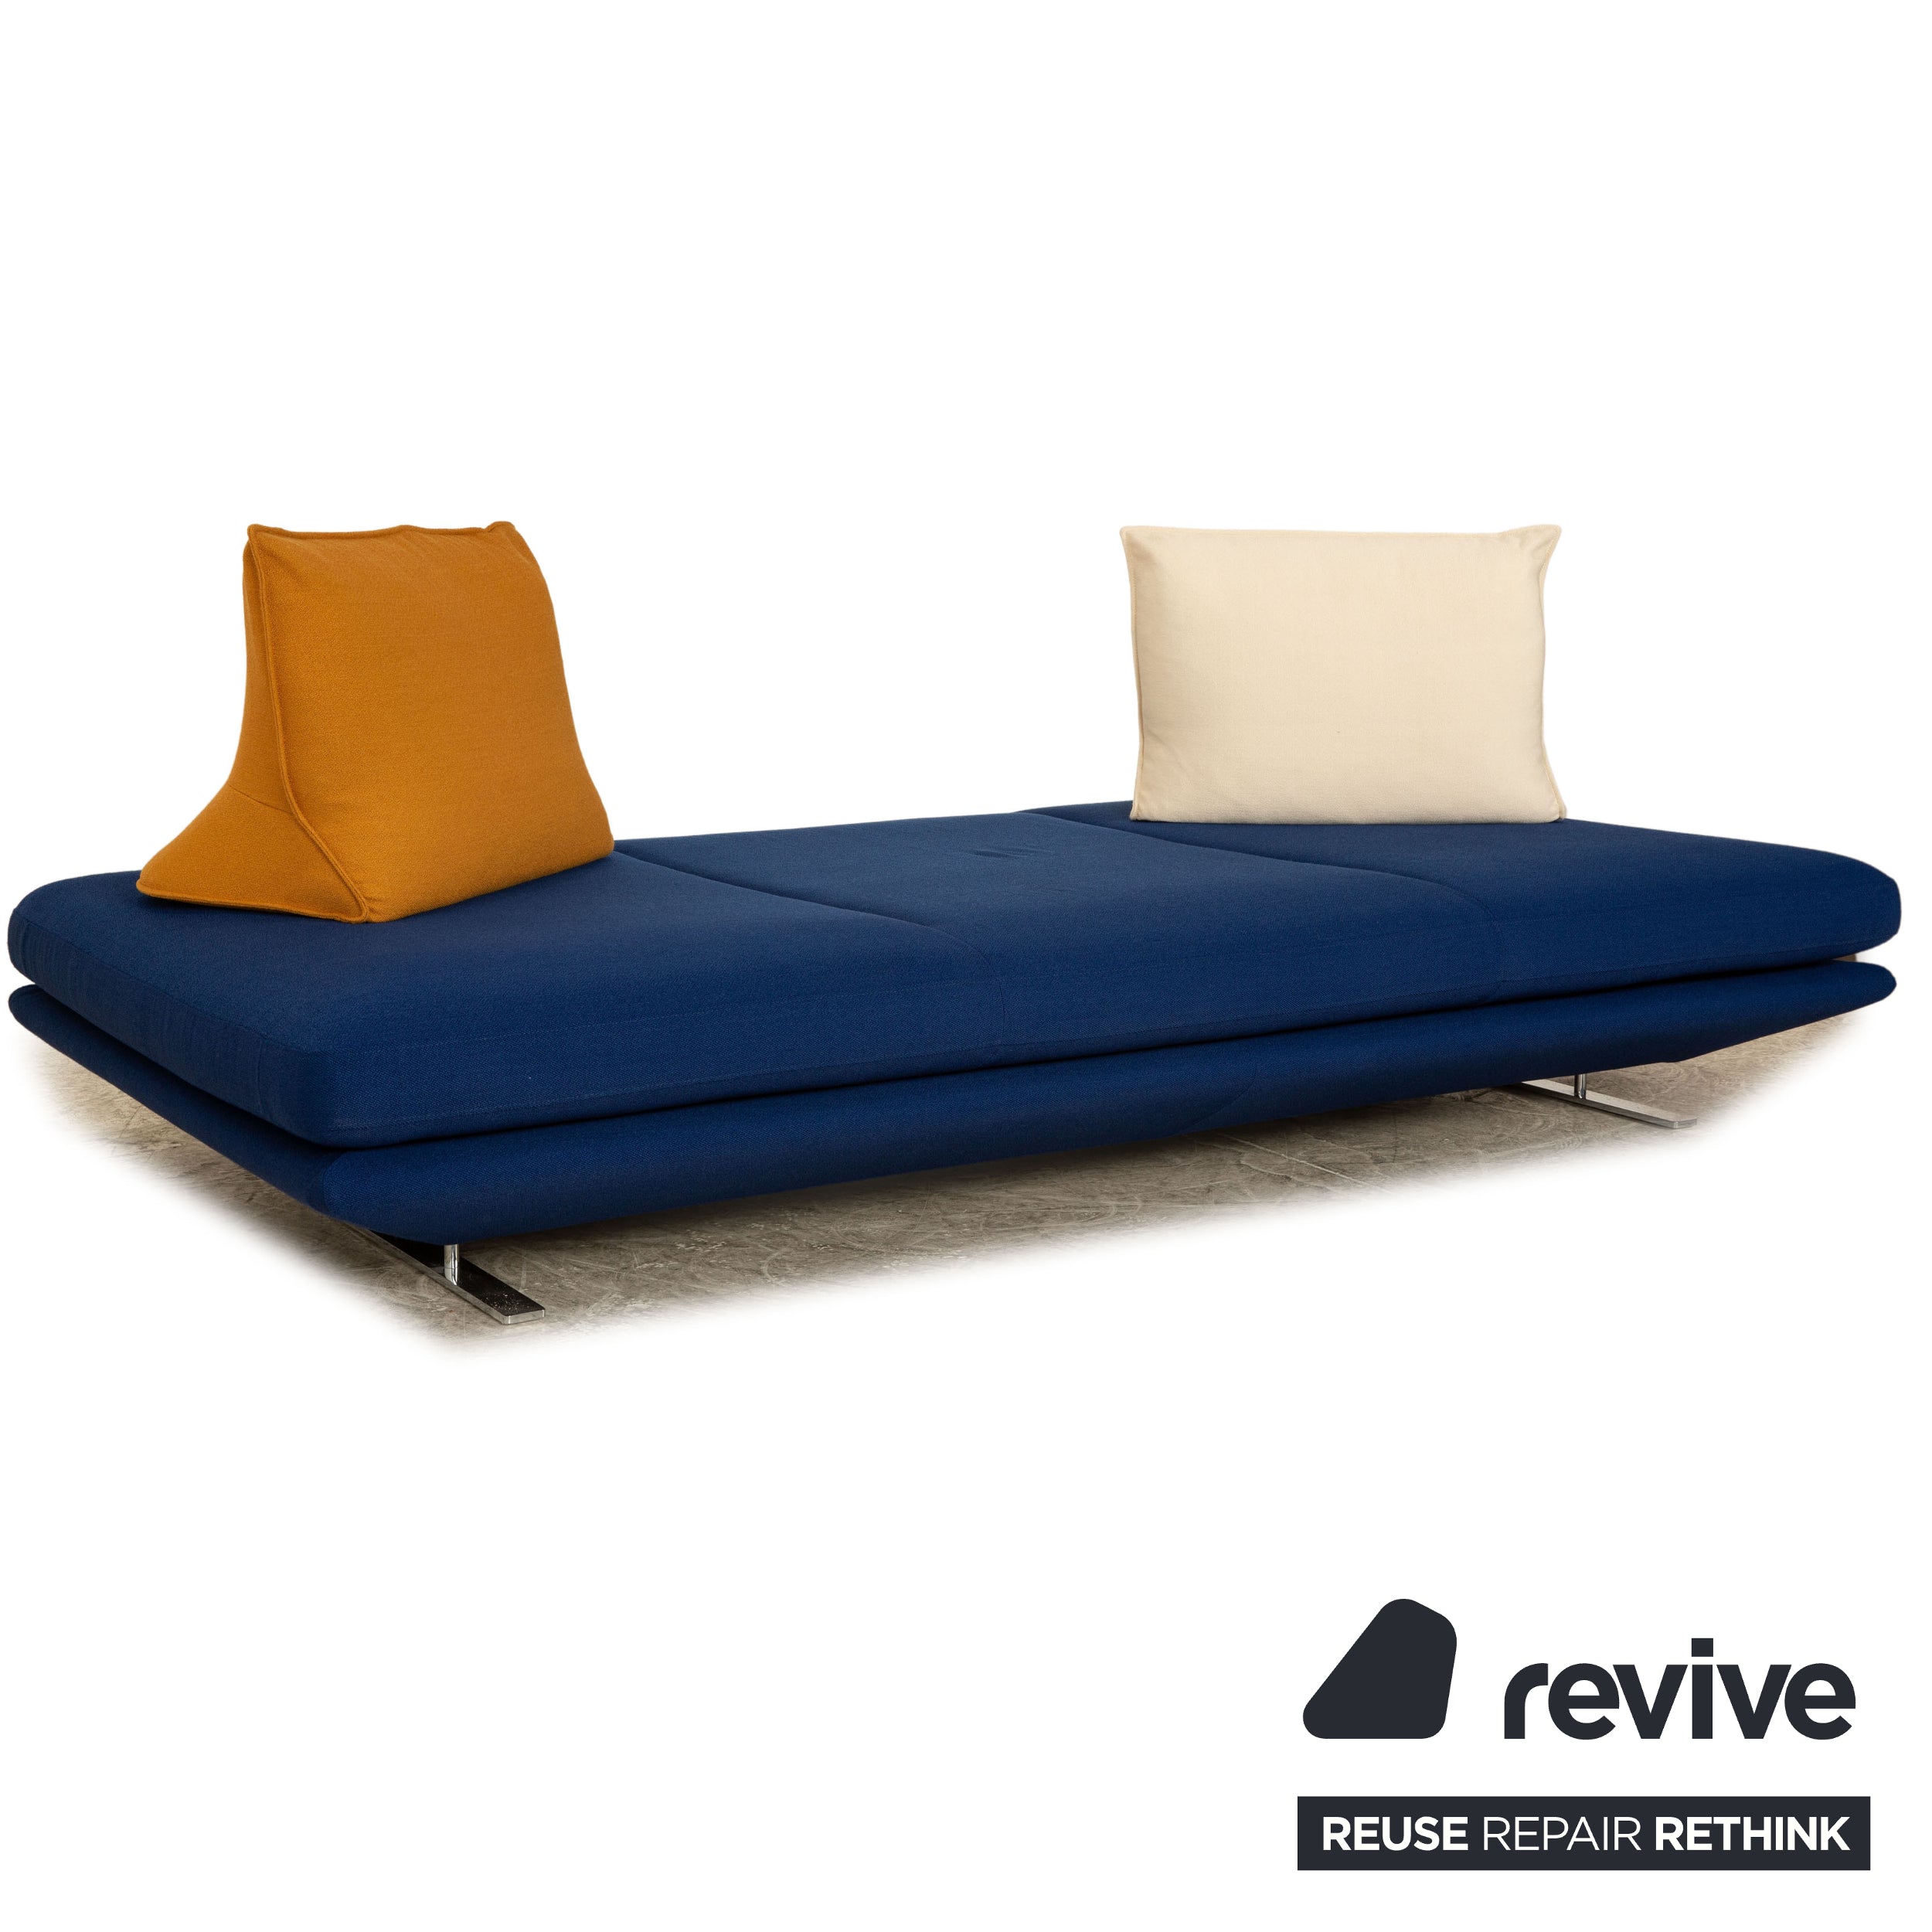 Ligne roset Prado fabric two seater blue manual function sofa couch